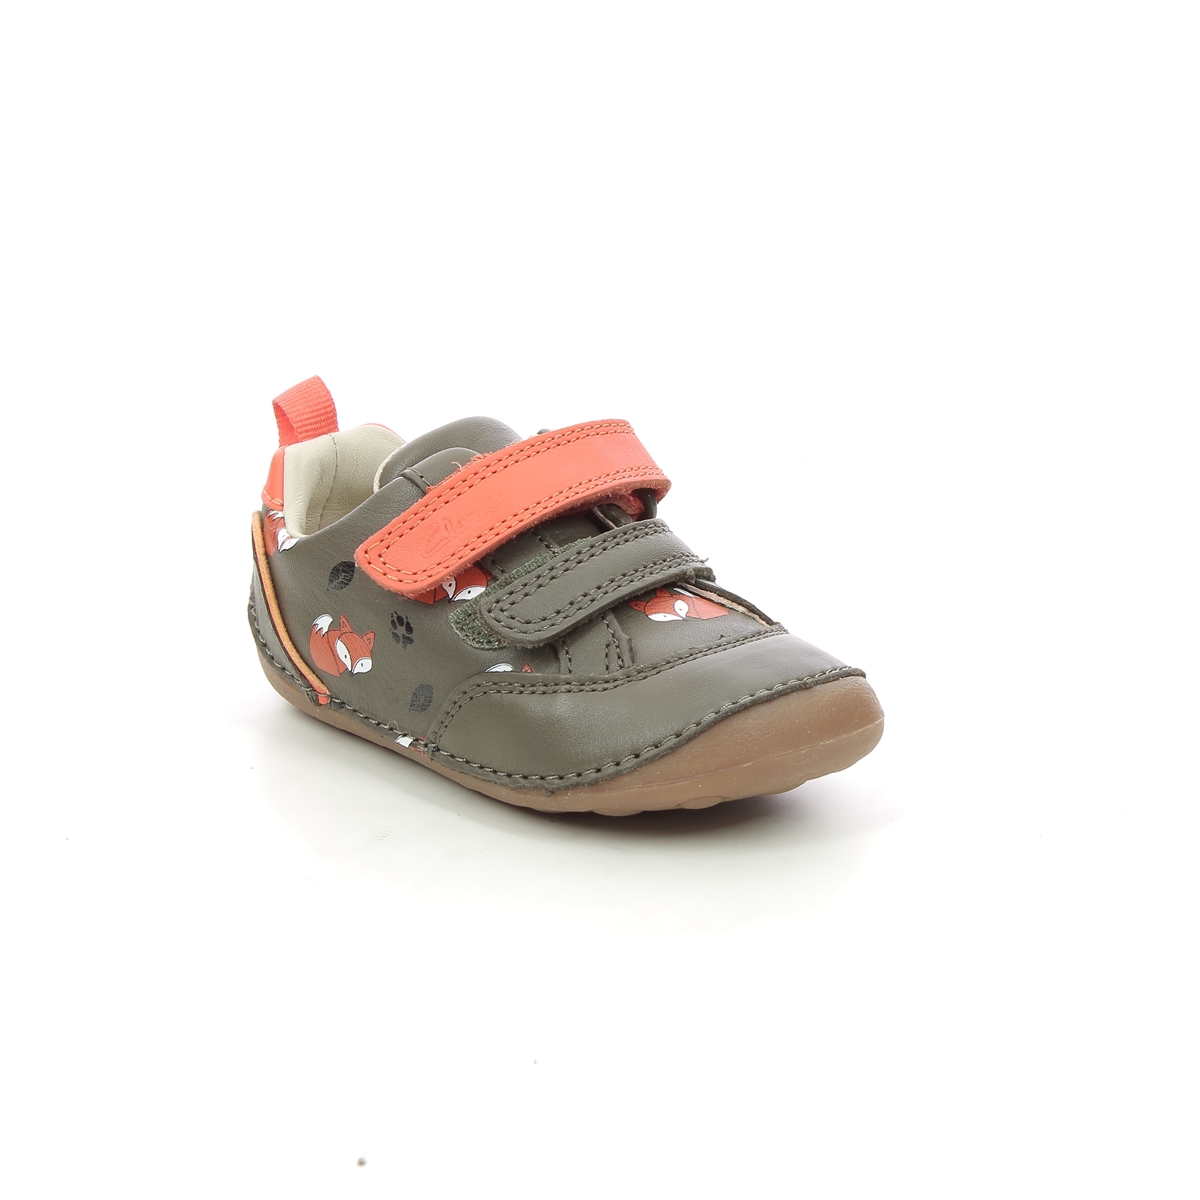 Clarks Tiny Cub T Fox Khaki Leather Kids Boys First Shoes 6387-36F in a Plain Leather in Size 4.5